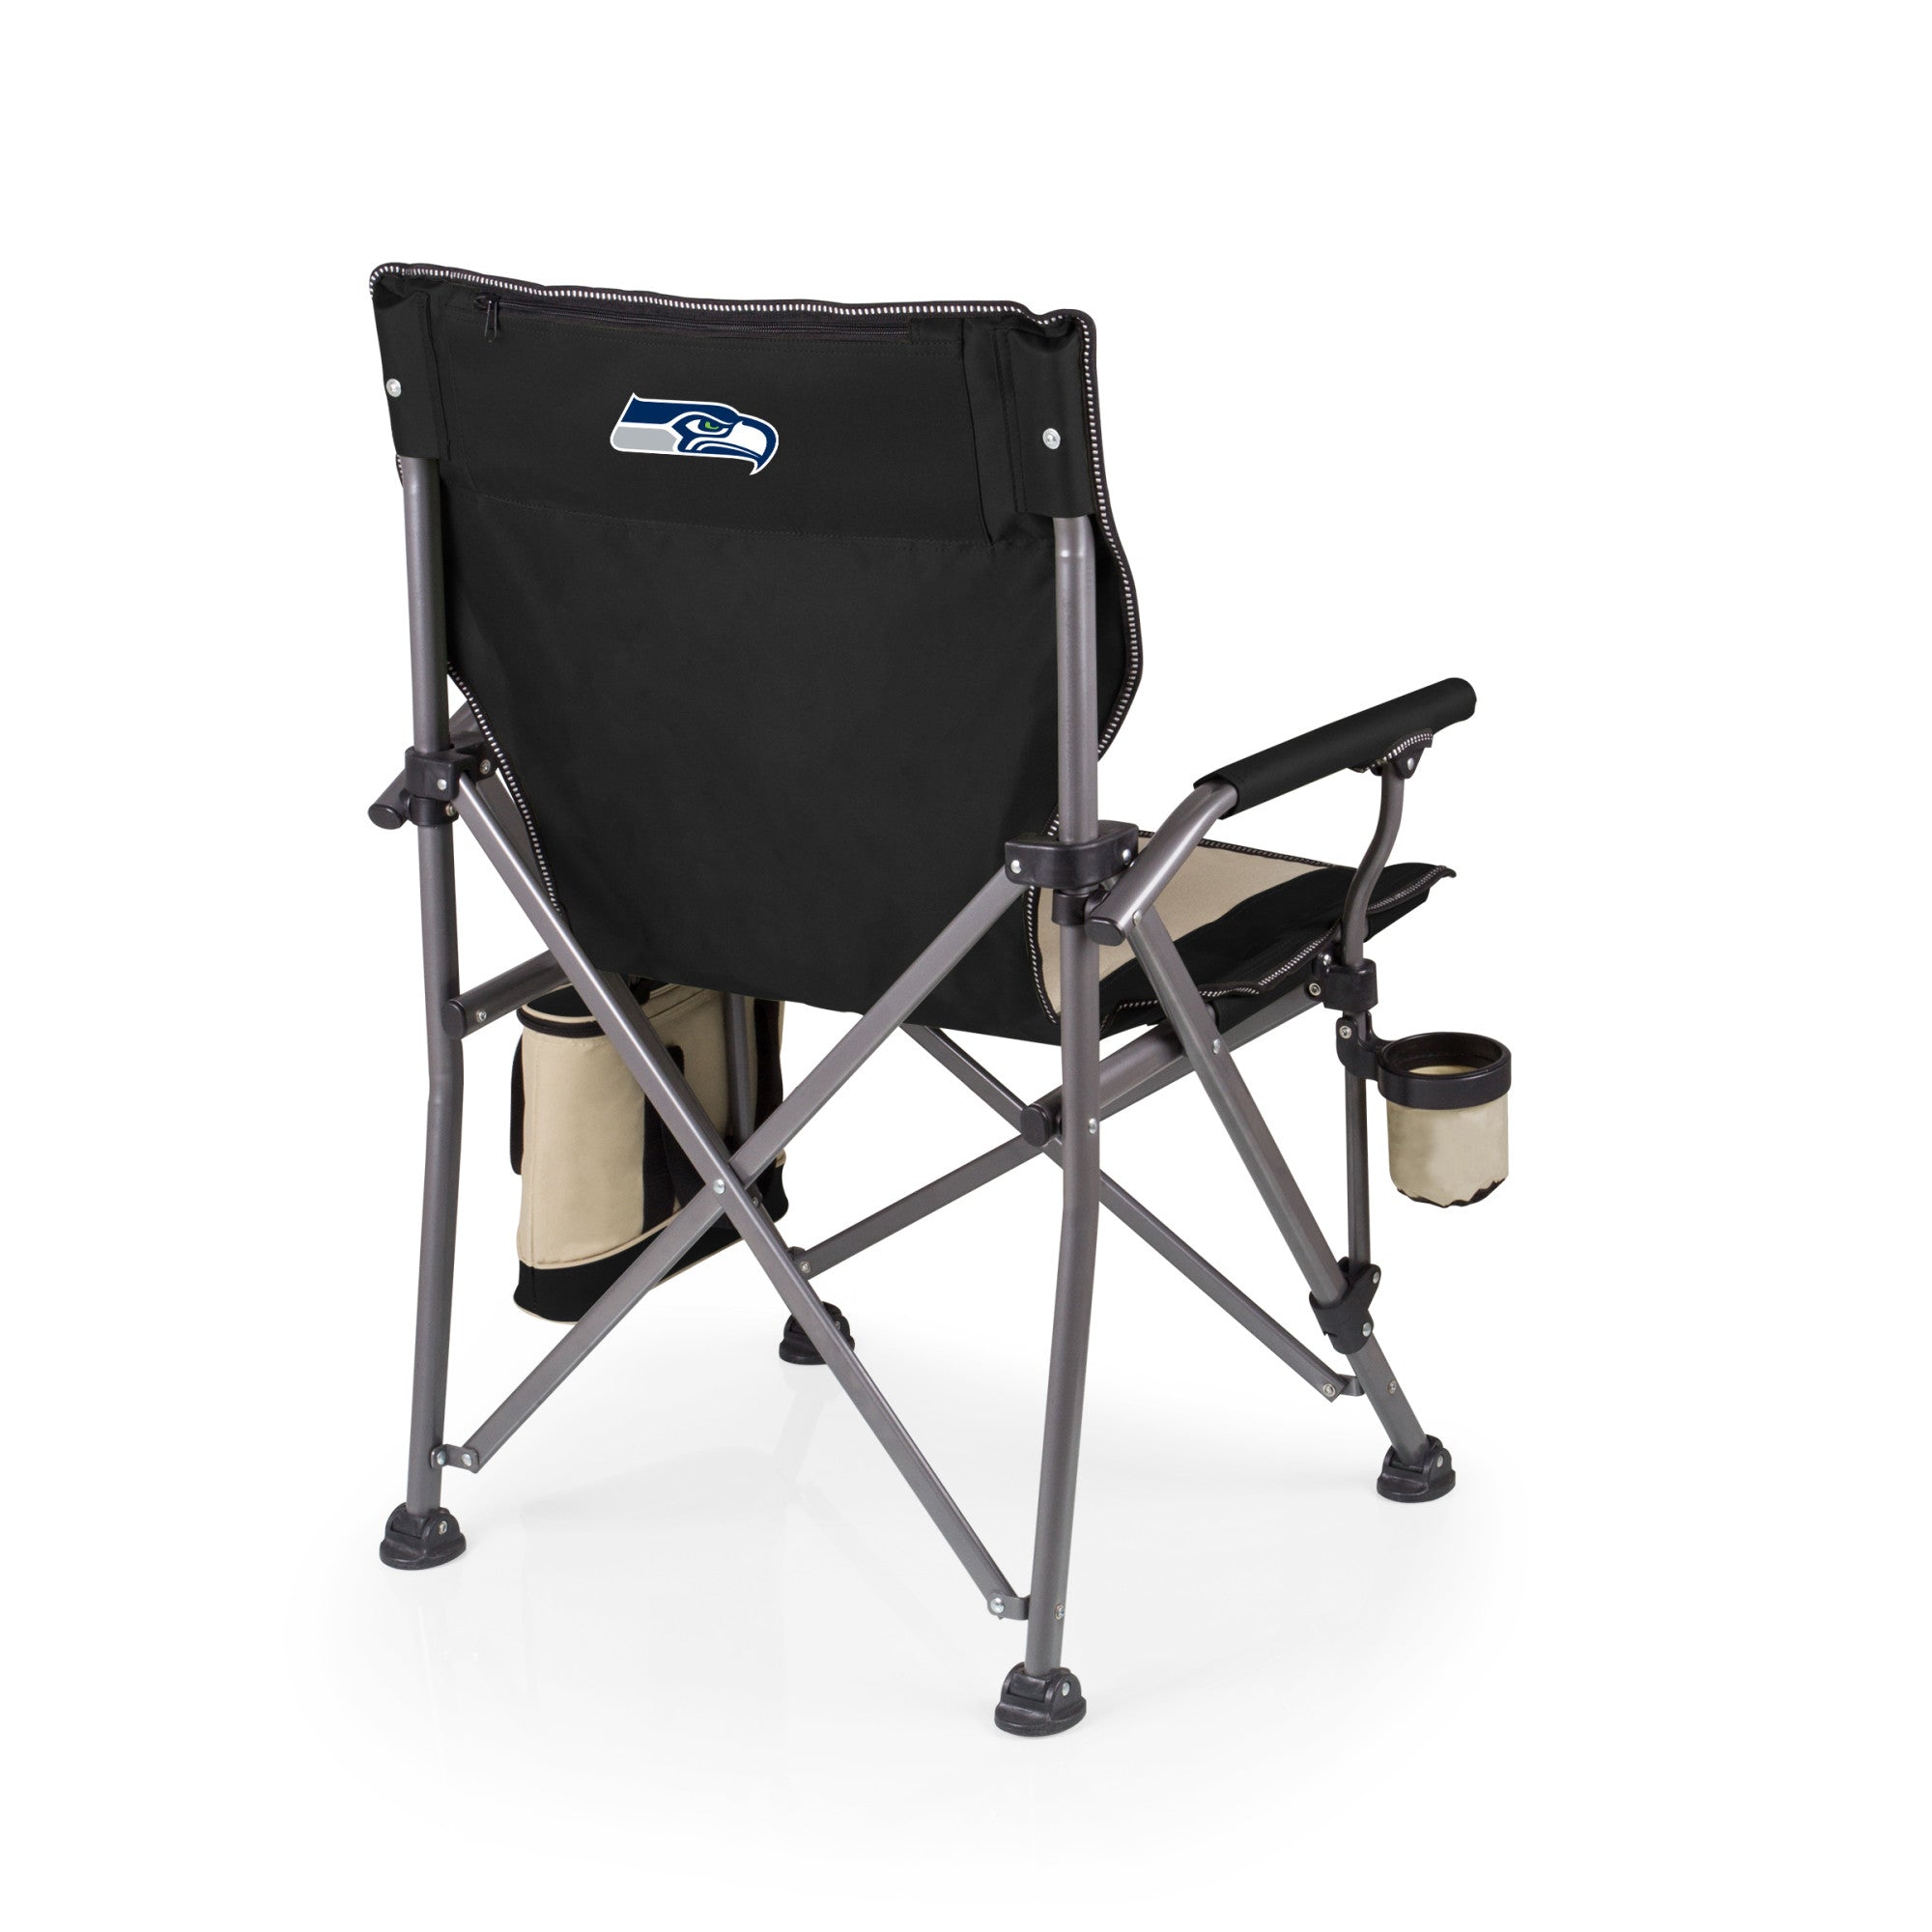 Seattle Seahawks - Outlander XL Camping Chair with Cooler